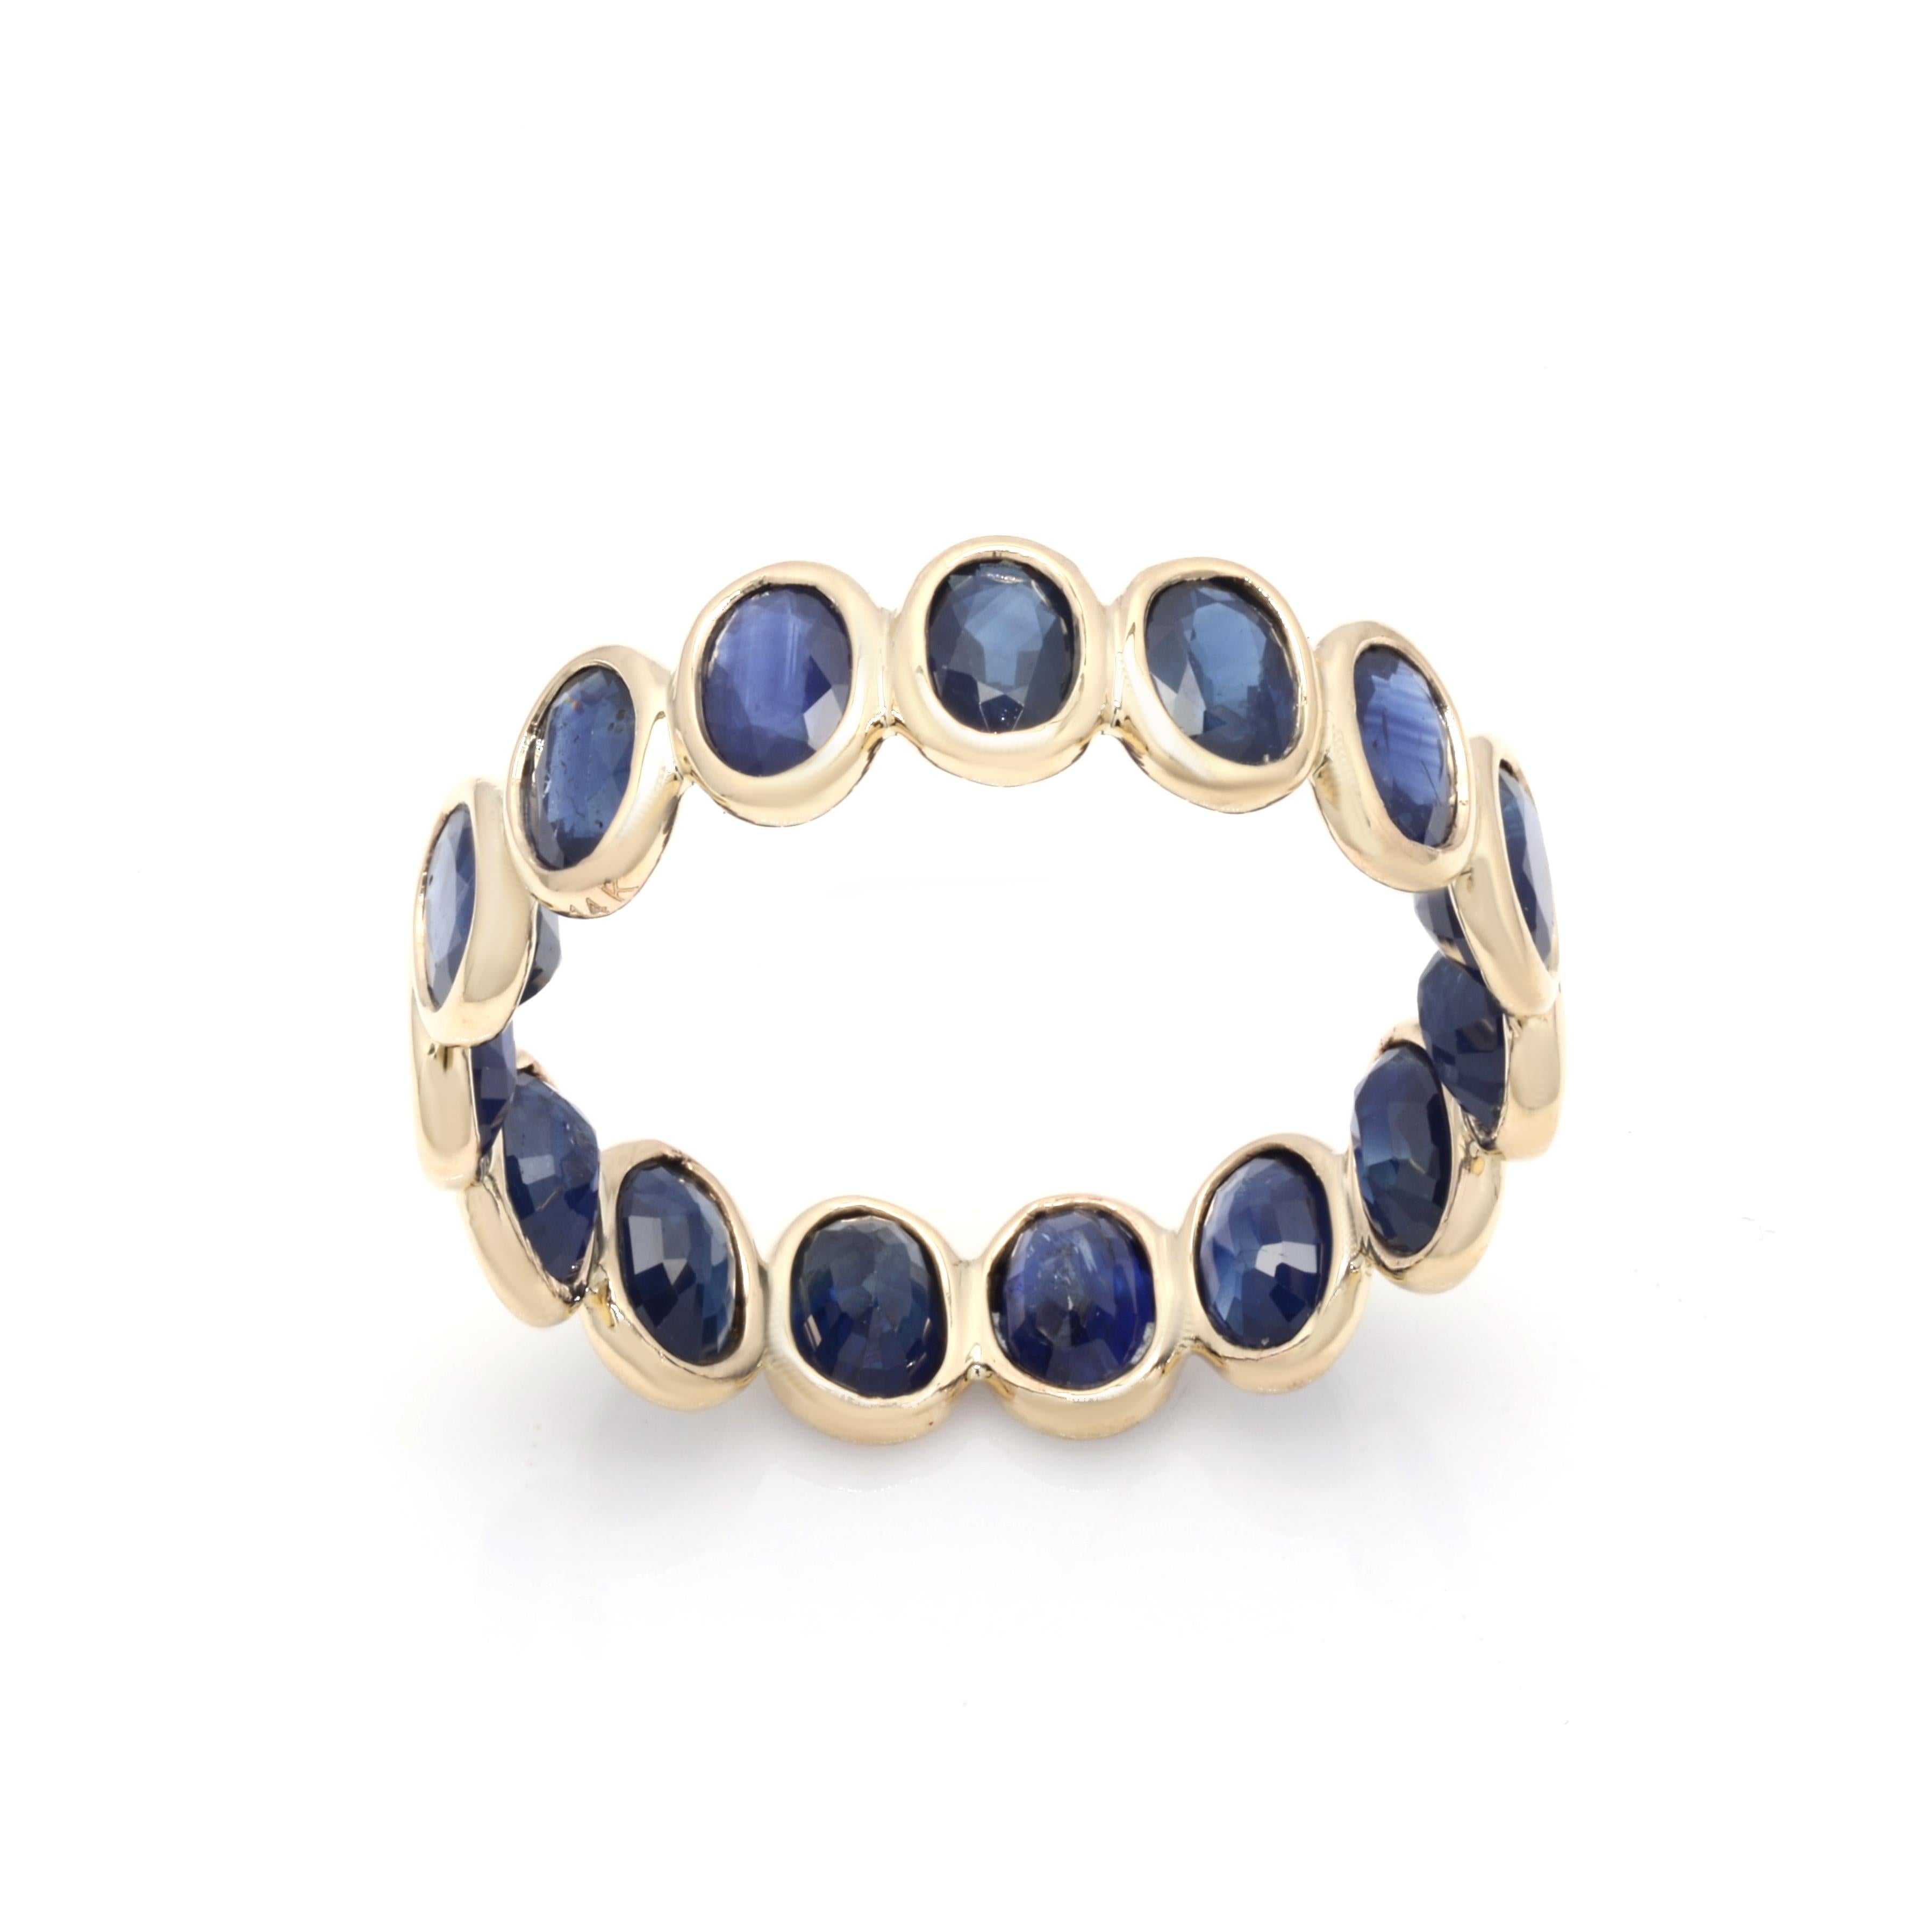 For Sale:  14K Yellow Gold 5 Carat Oval Cut Sapphire Eternity Band Ring 2